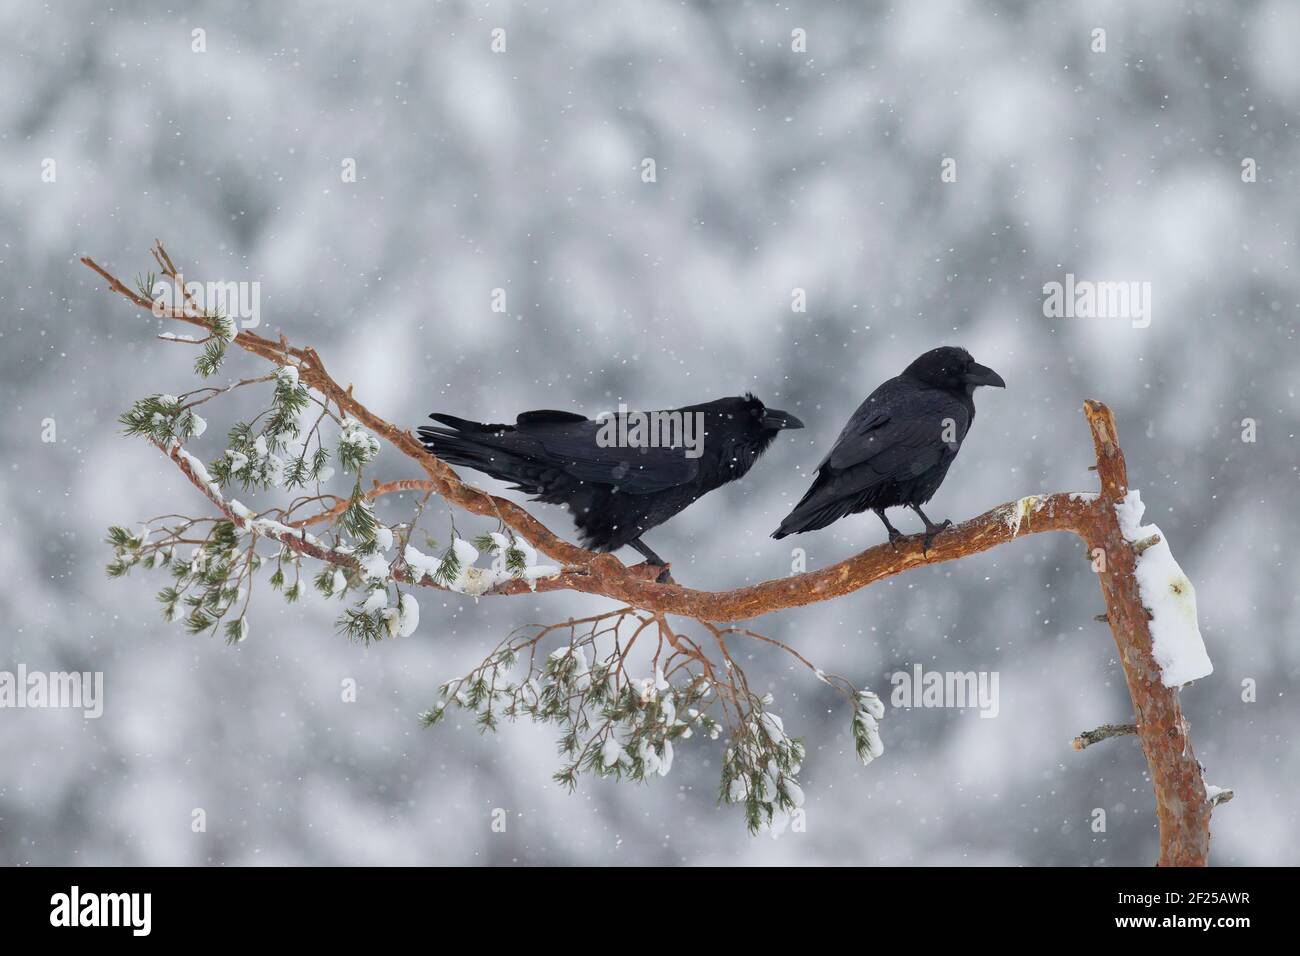 Common ravens / northern raven (Corvus corax) pair perched in spruce tree in winter during snow shower Stock Photo